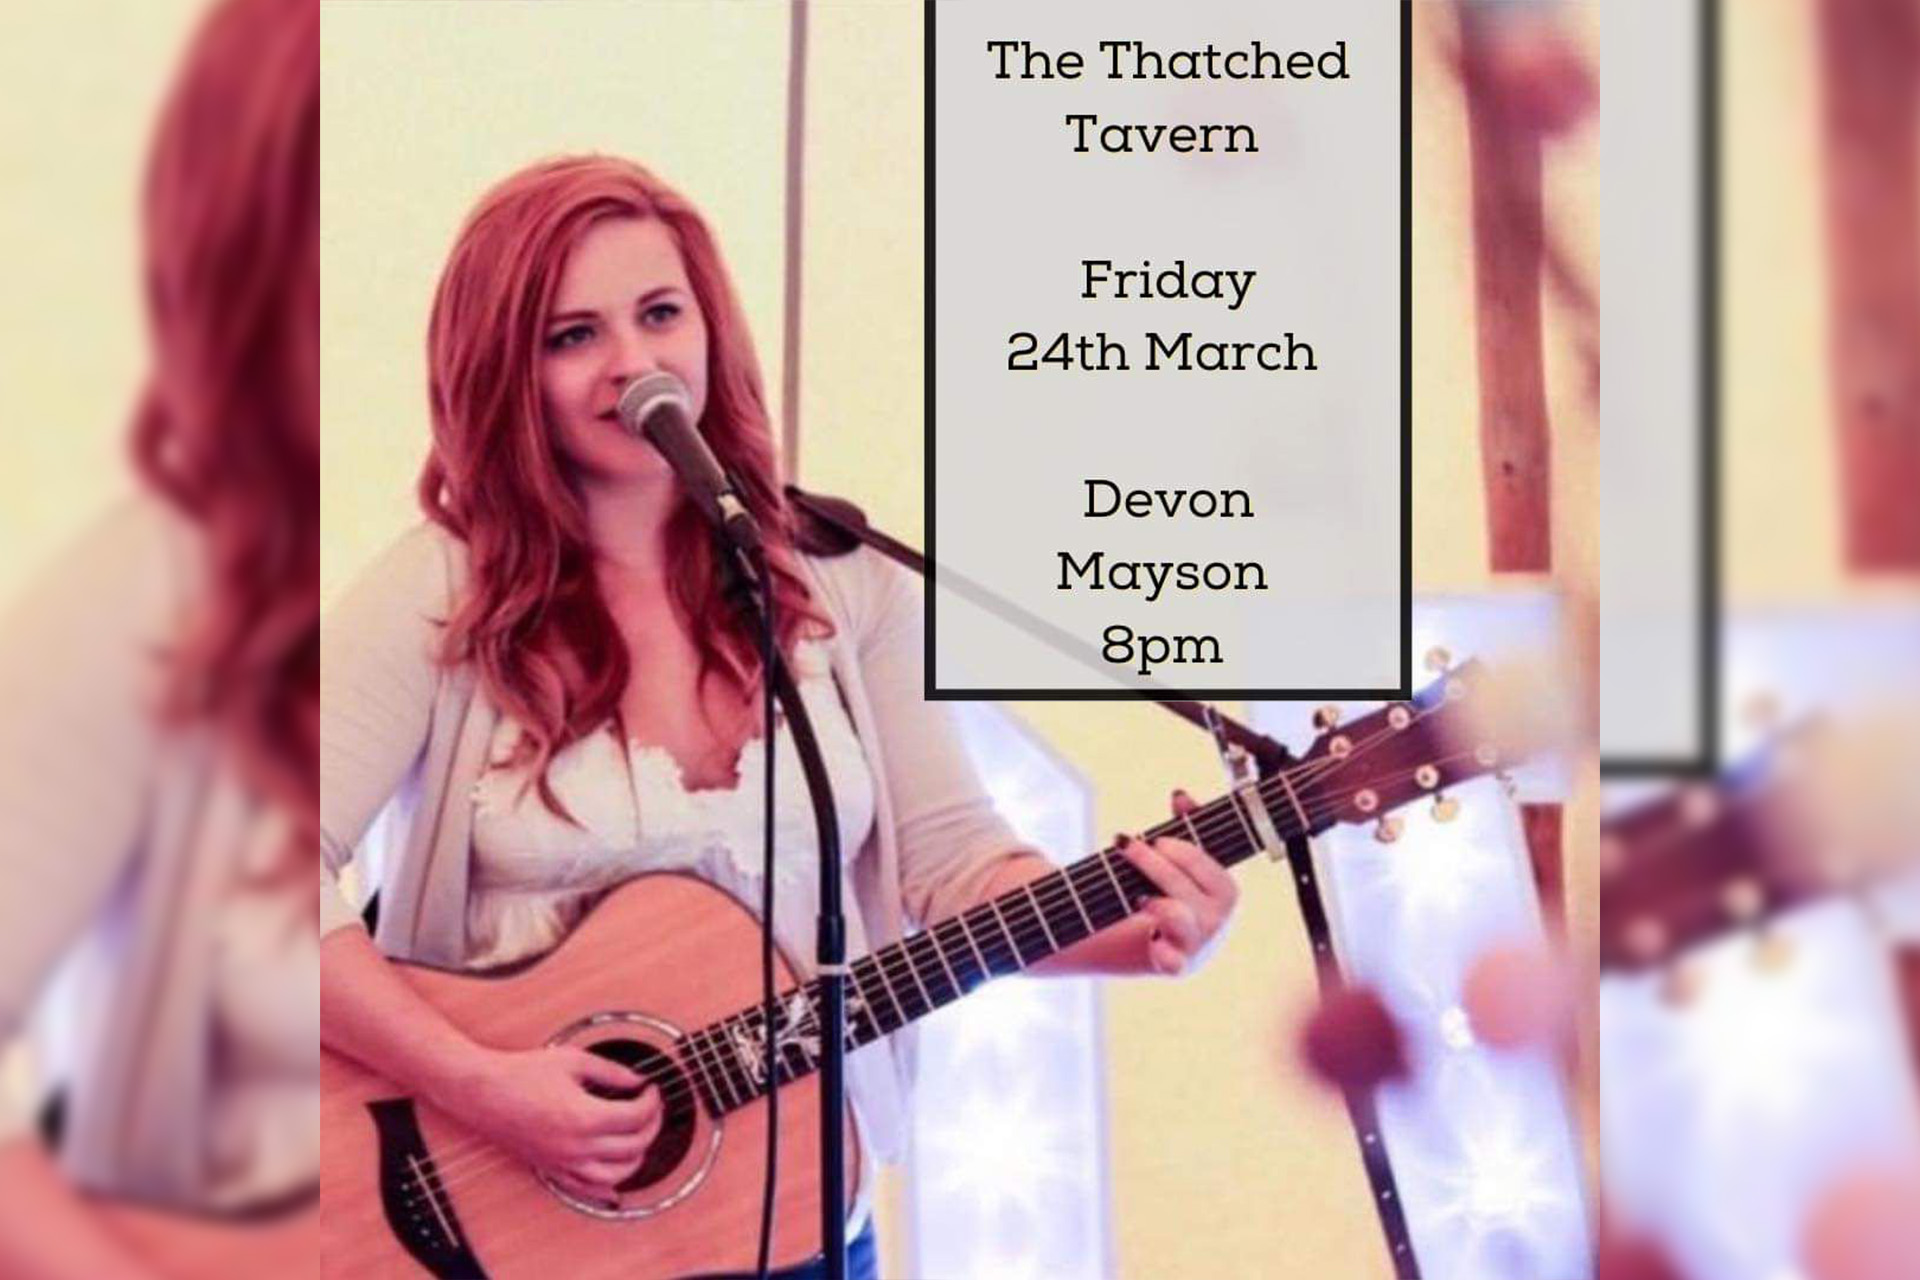 Live music performed by the amazing Devon Mayson at The Thatched Tavern Pub in Honeybourne - Friday 24th March from 8.00pm.